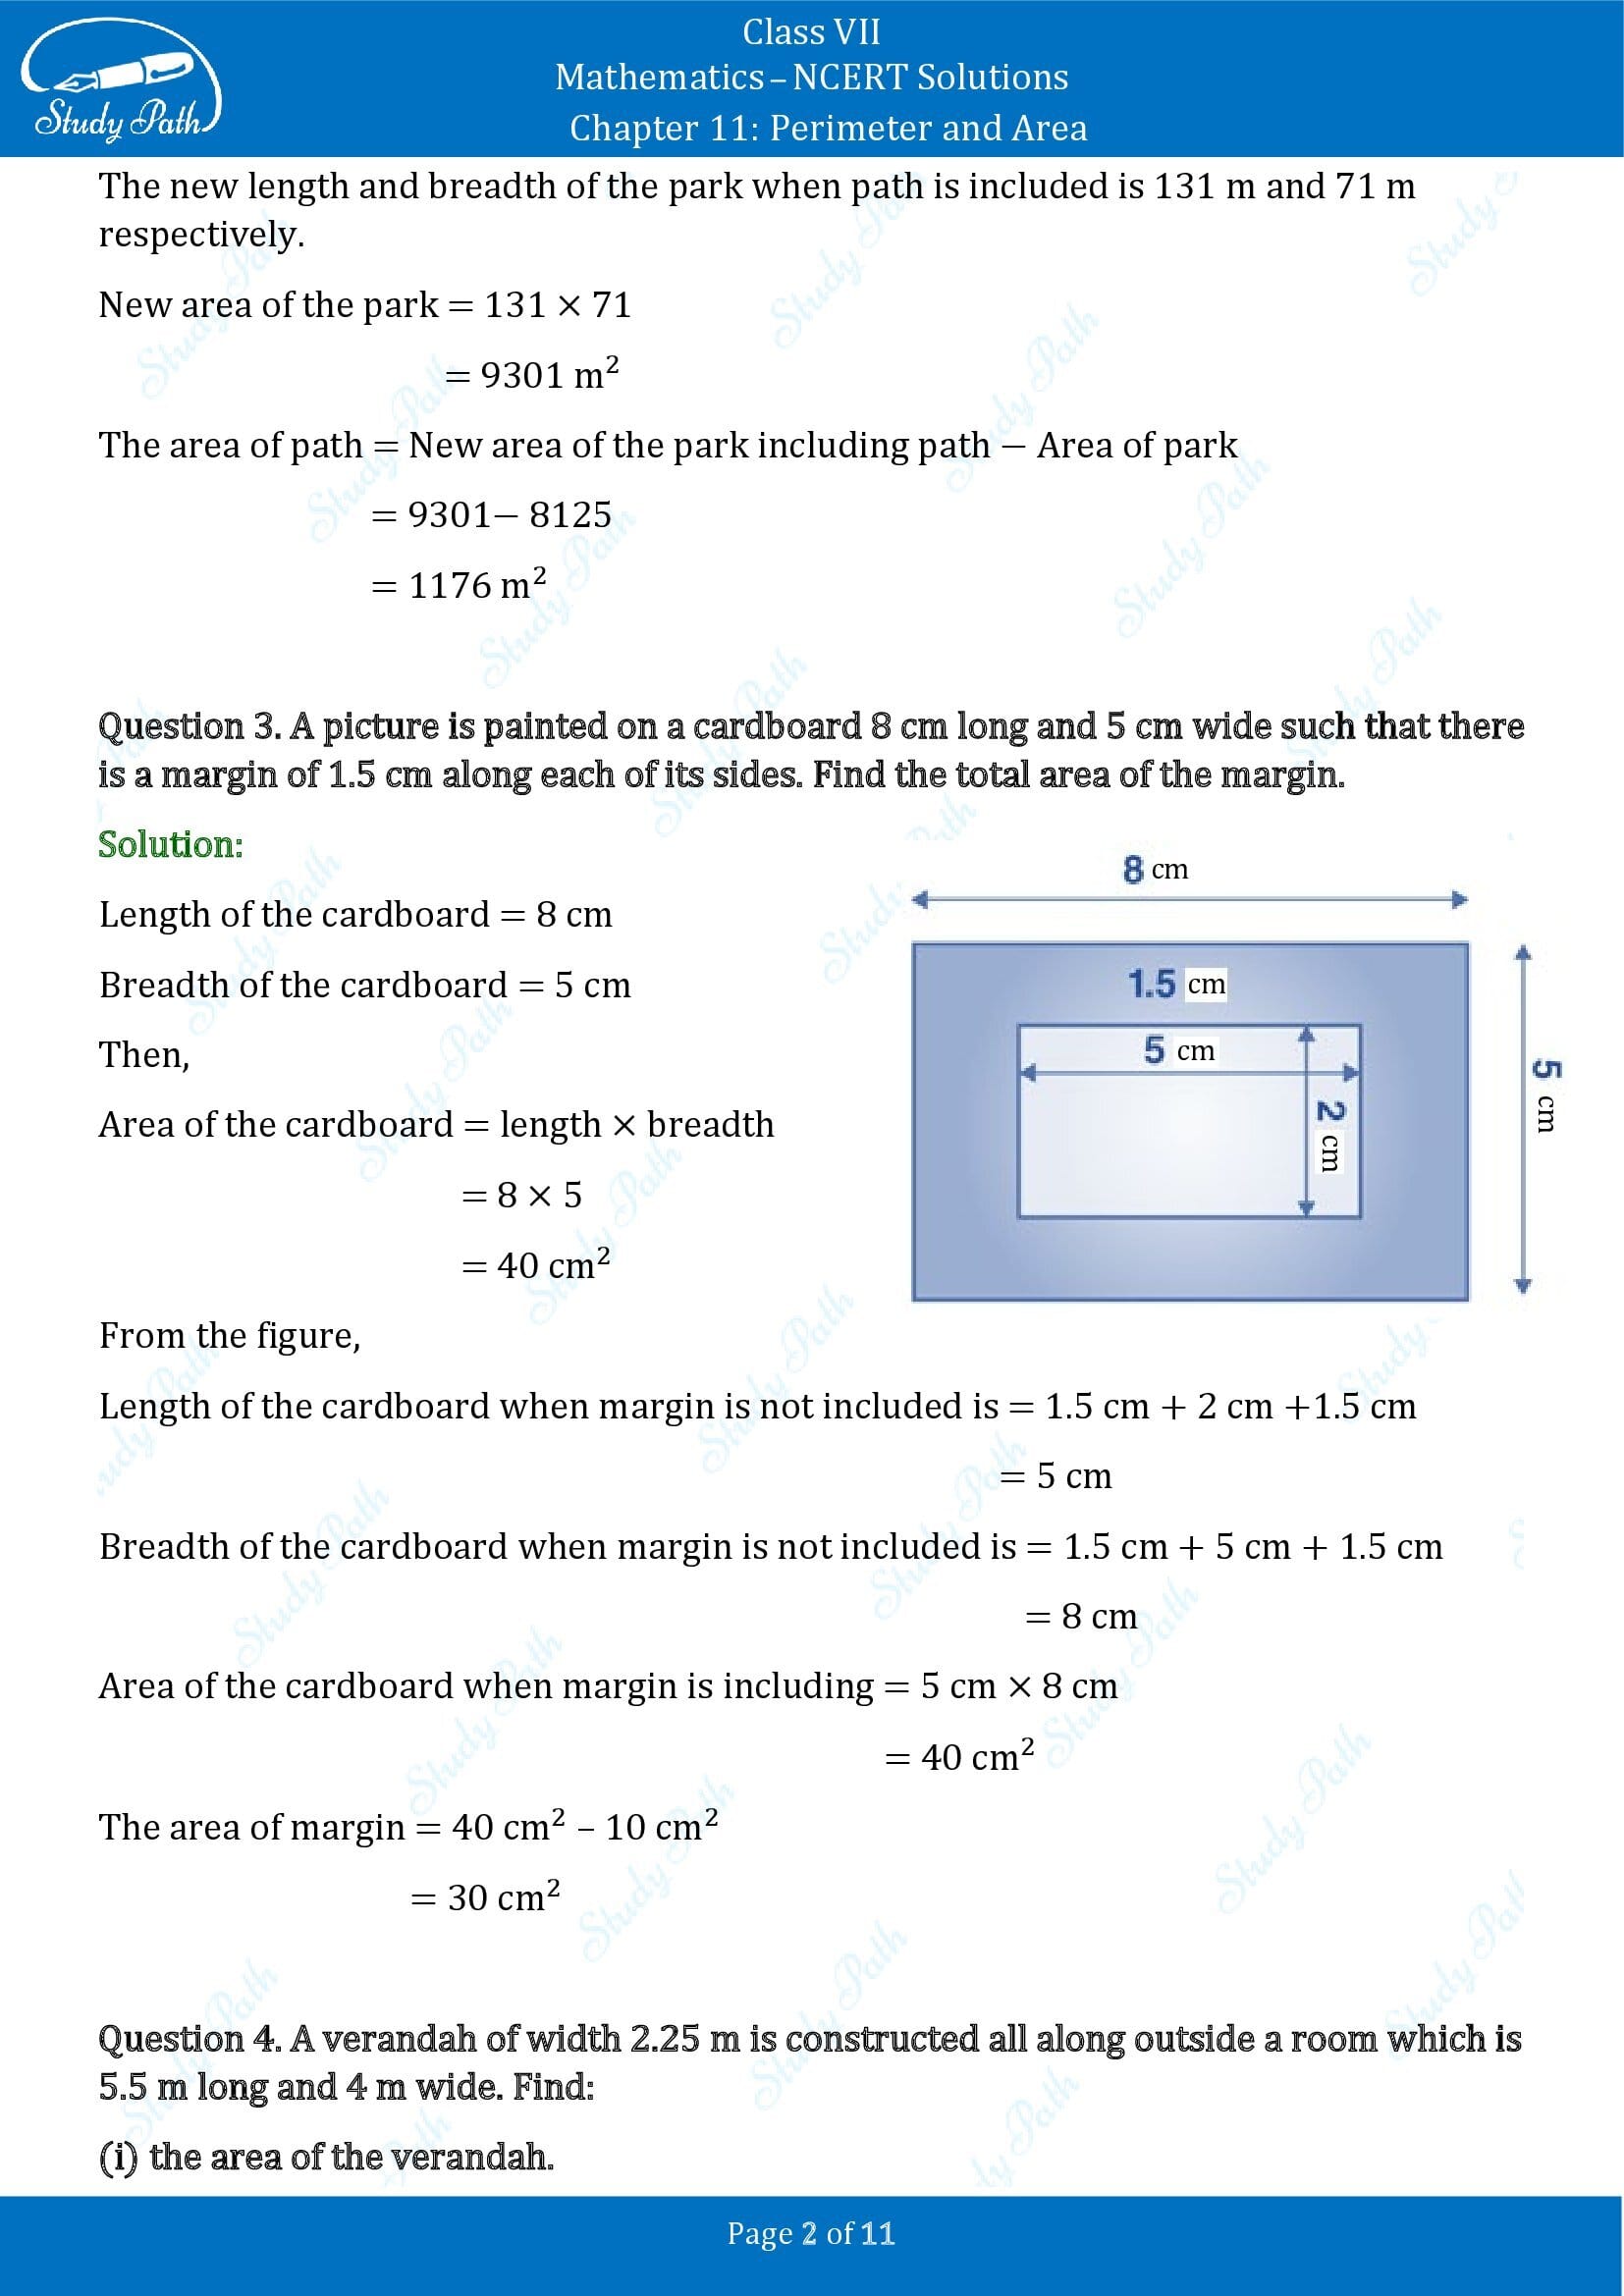 NCERT Solutions for Class 7 Maths Chapter 11 Perimeter and Area Exercise 11.4 00002